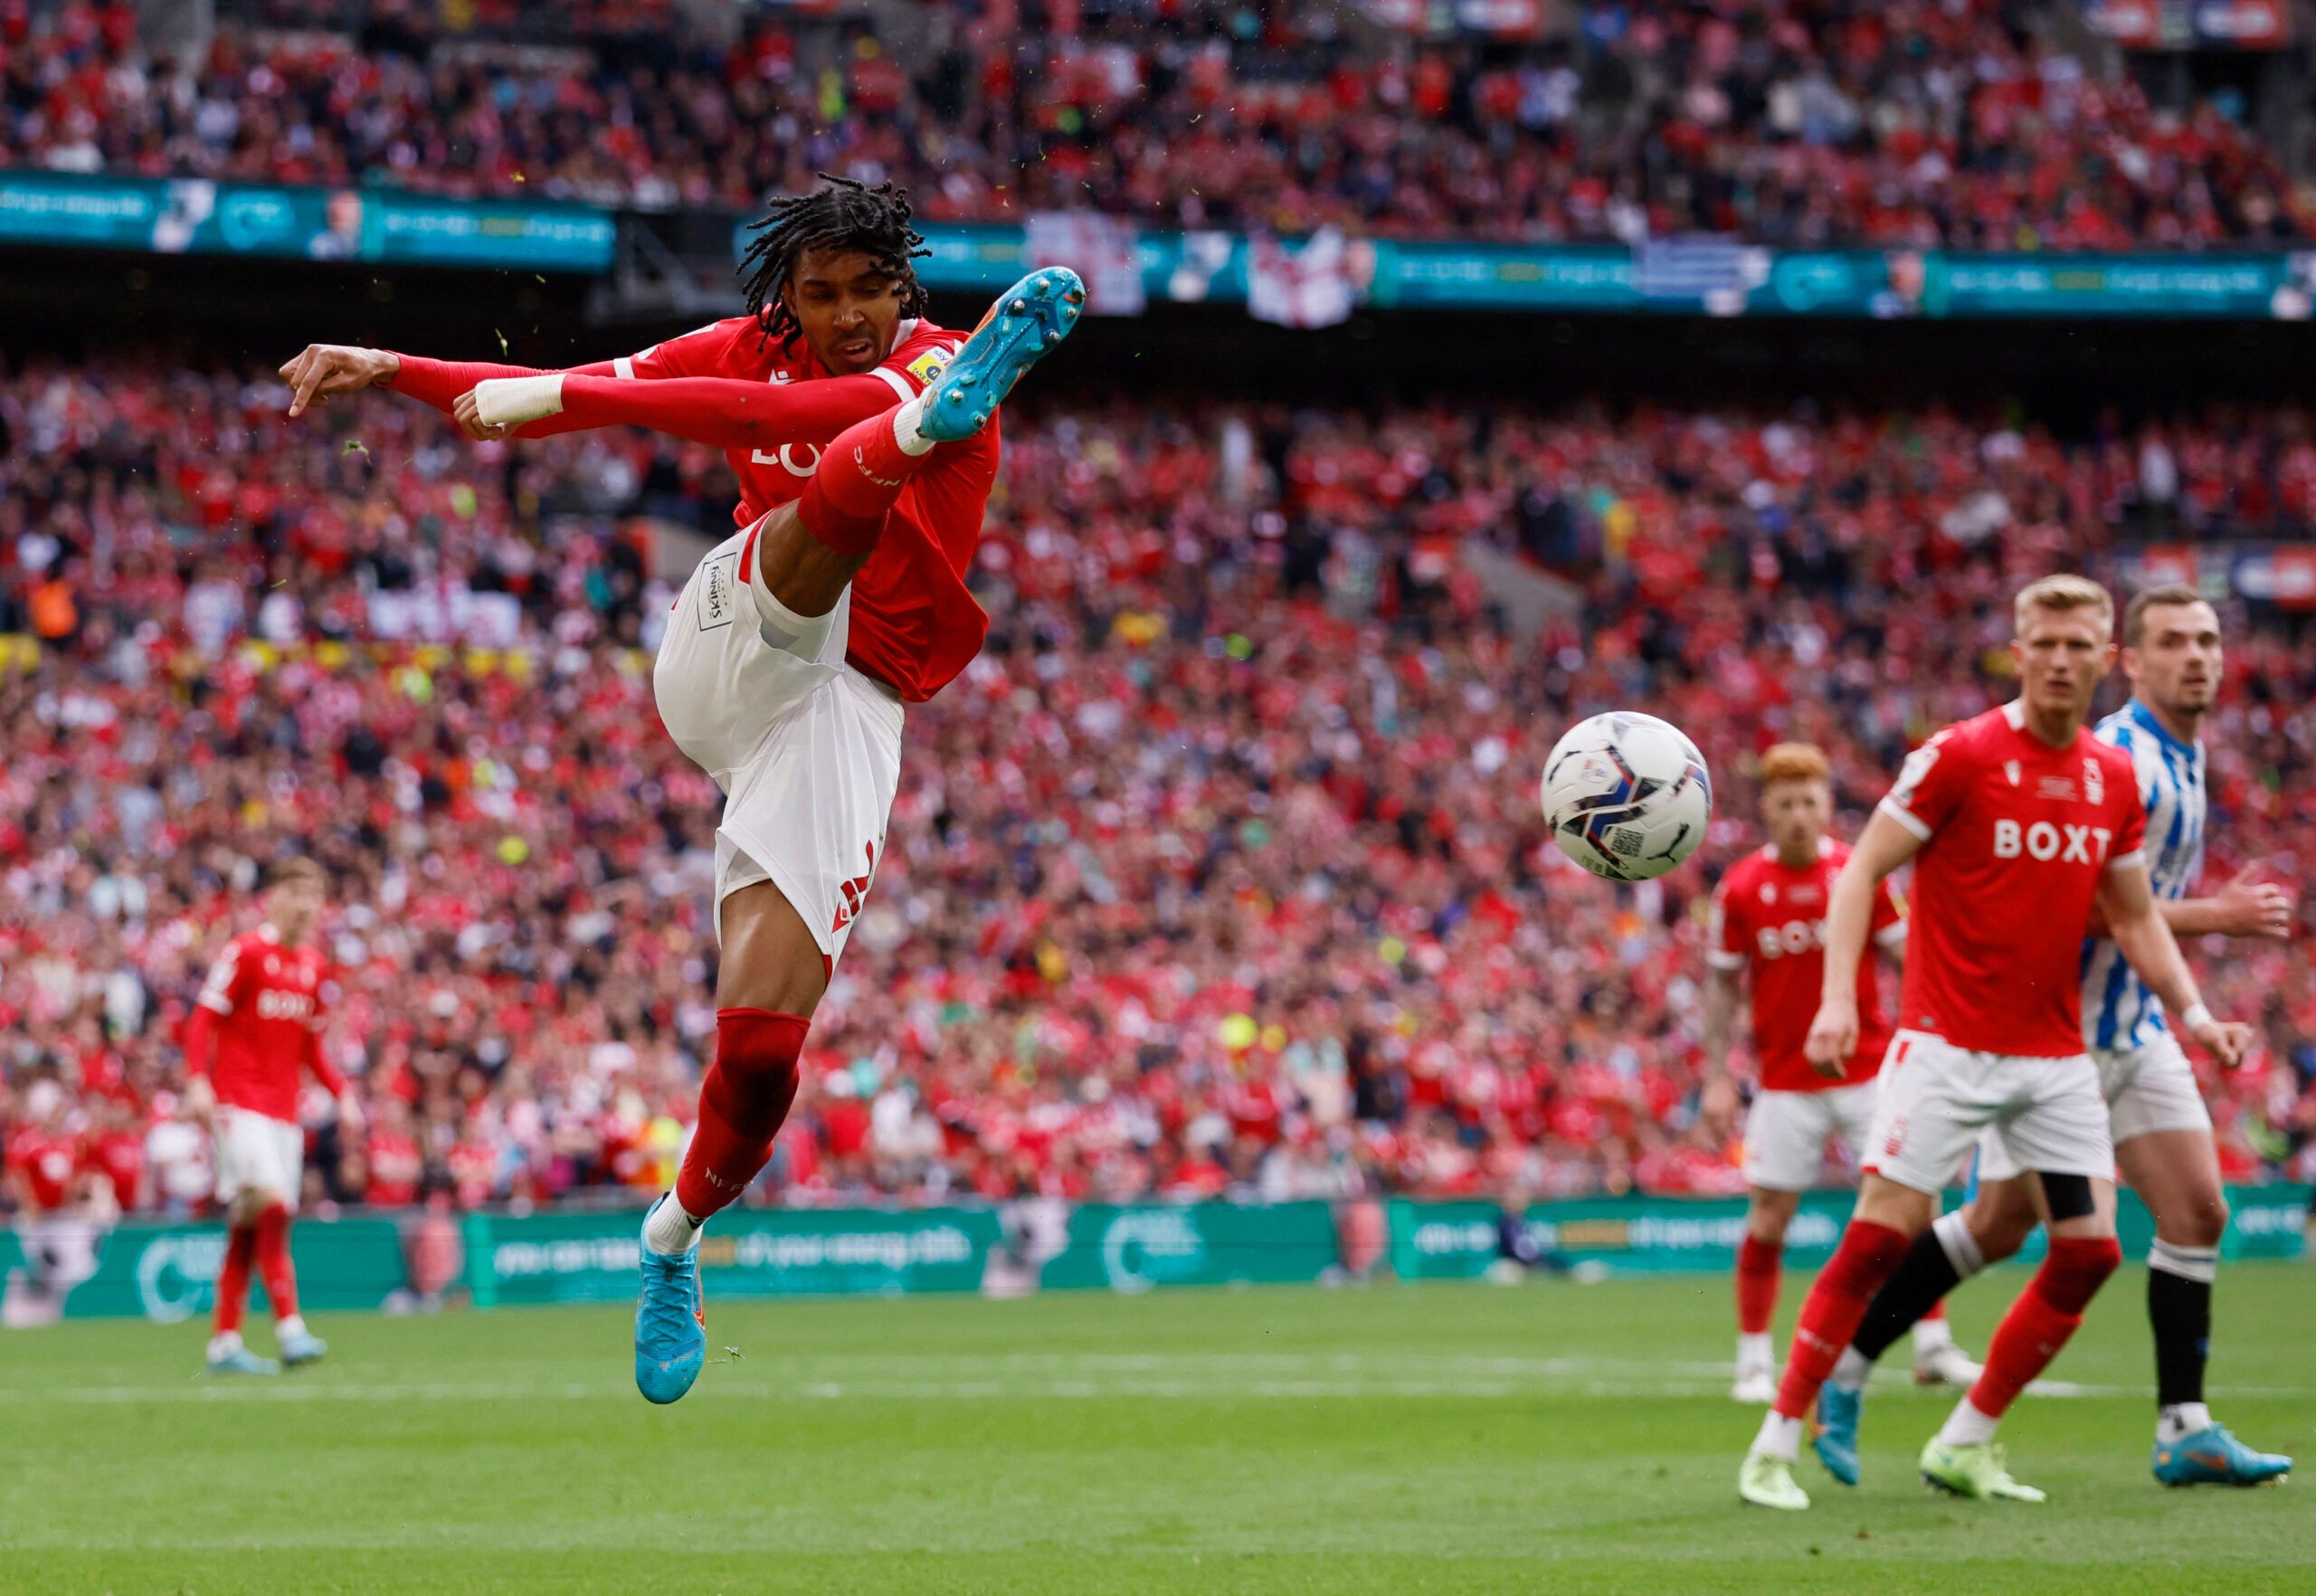 Soccer Football - Championship Play-Off Final - Huddersfield Town v Nottingham Forest - Wembley Stadium, London, Britain - May 29, 2022 Nottingham Forest's Djed Spence in action Action Images via Reuters/Andrew Couldridge